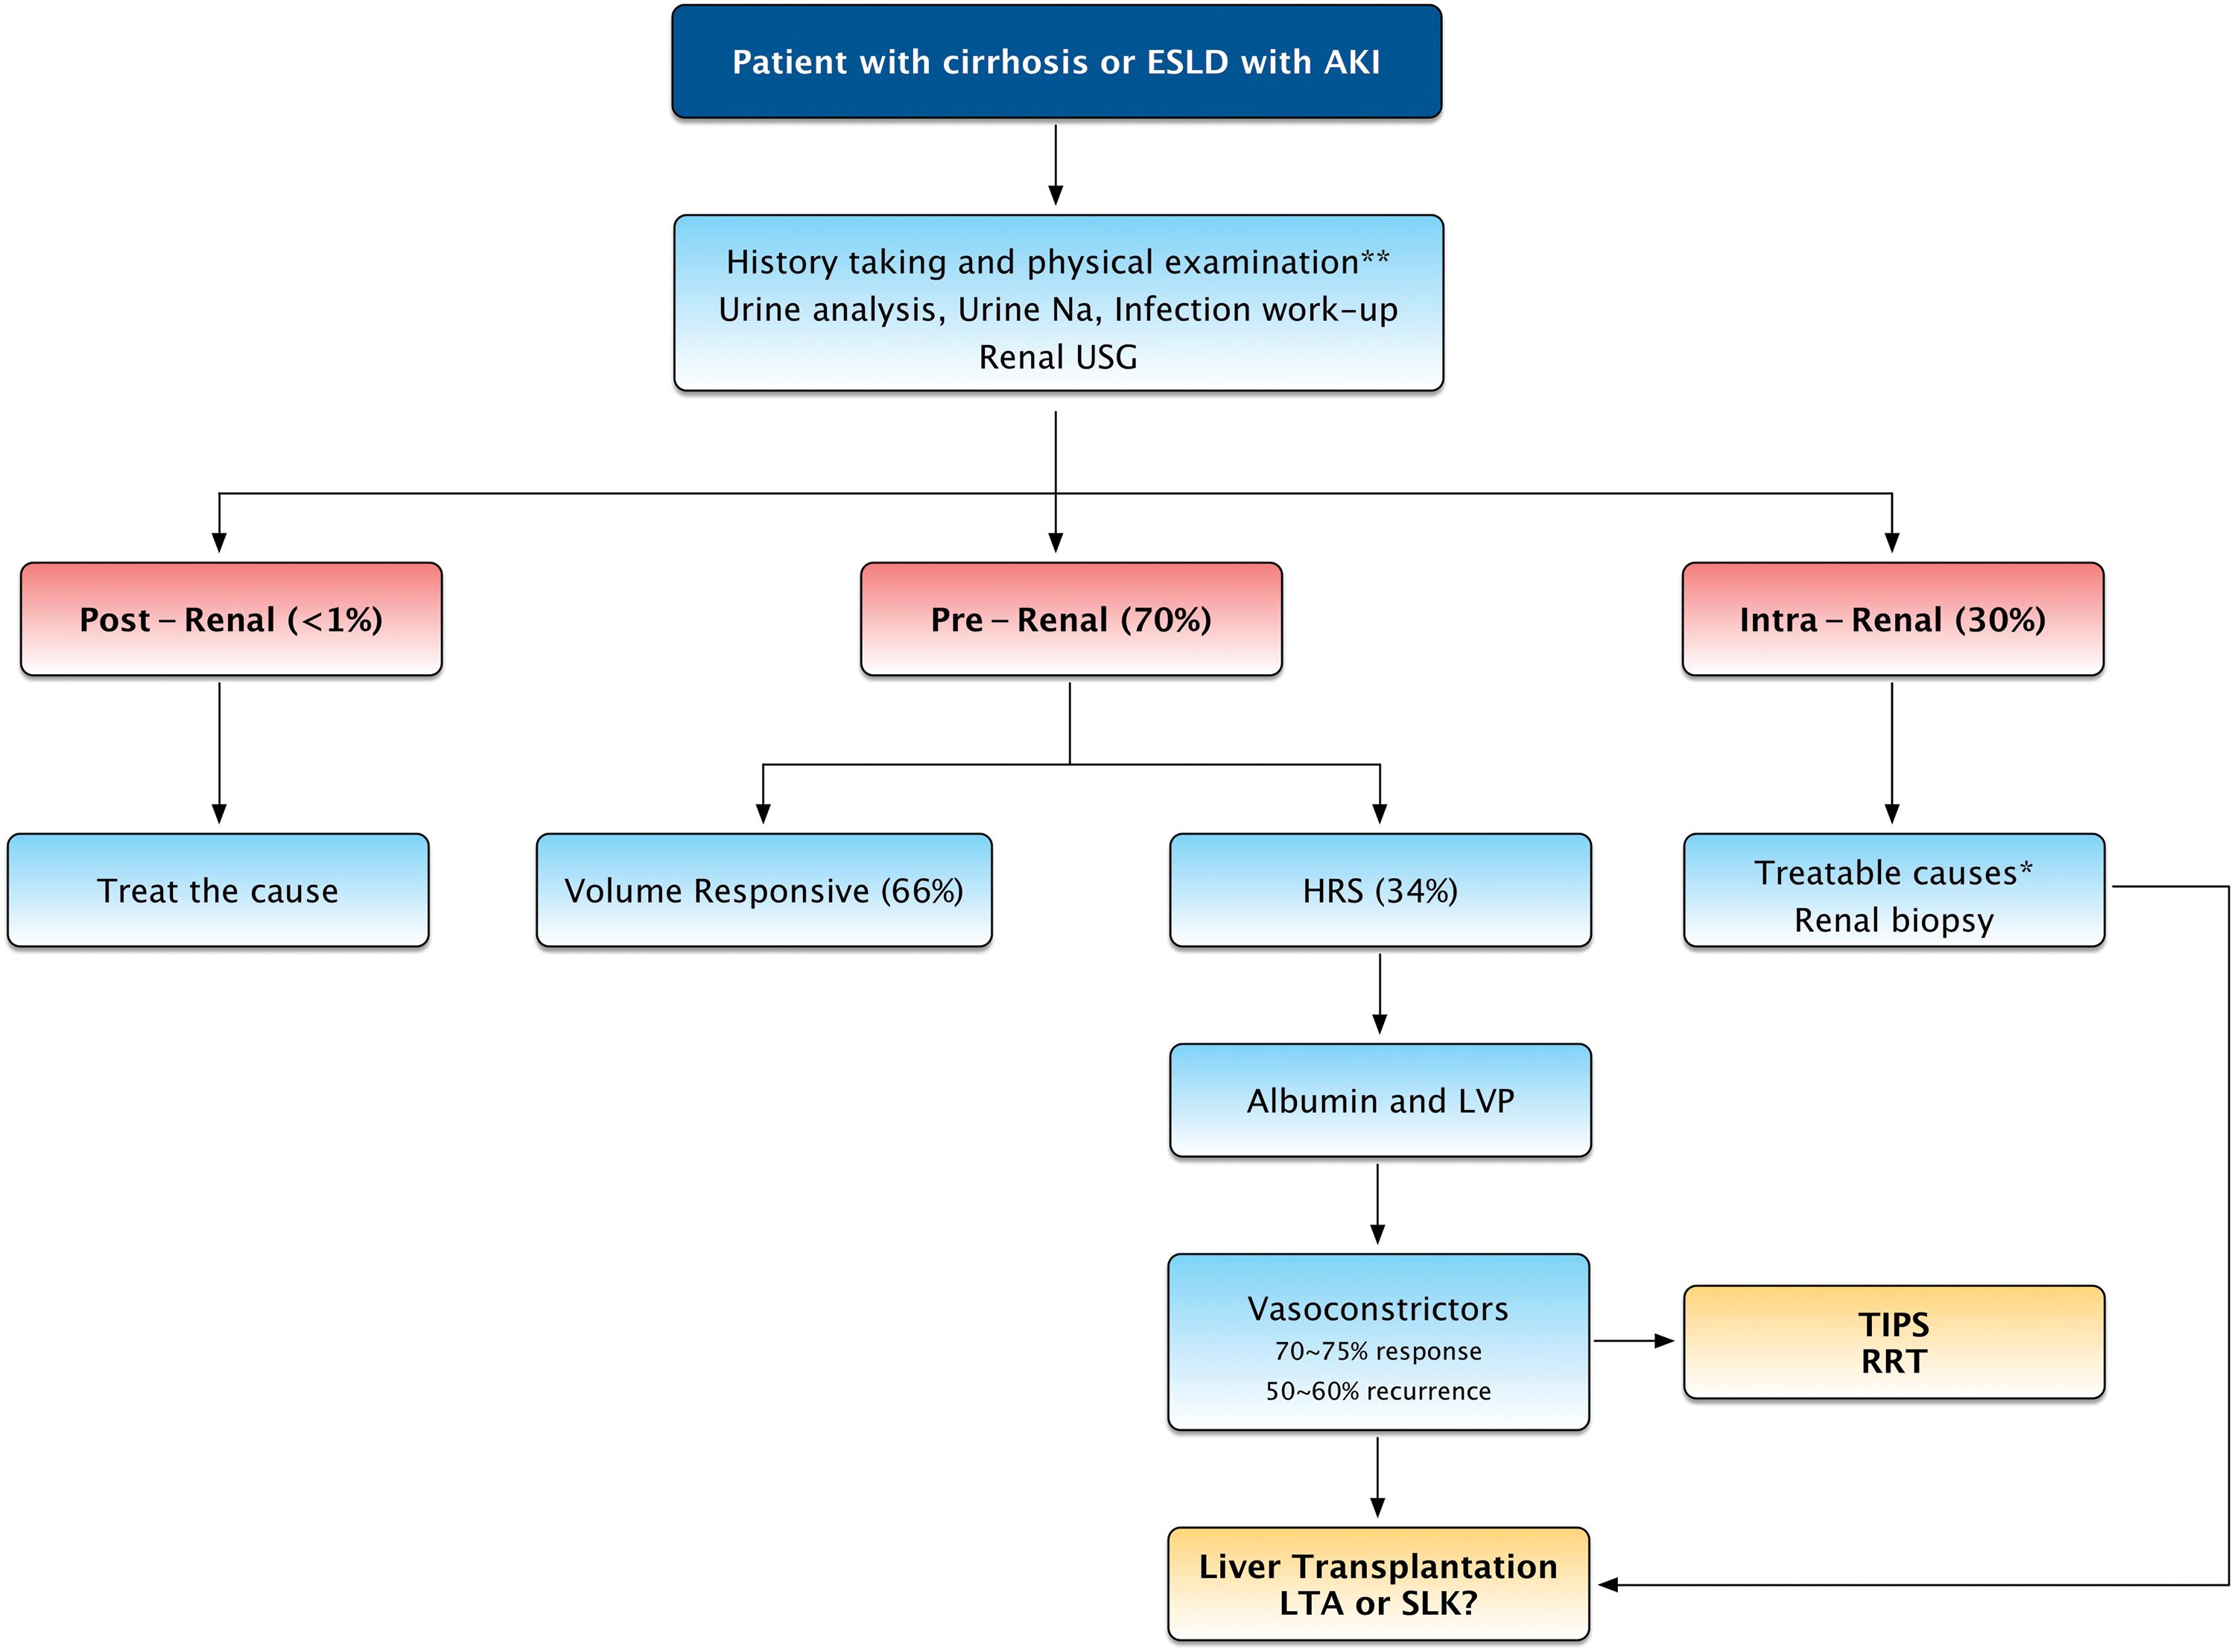 Management approach and algorithm for acute kidney injury in patients with cirrhosis.